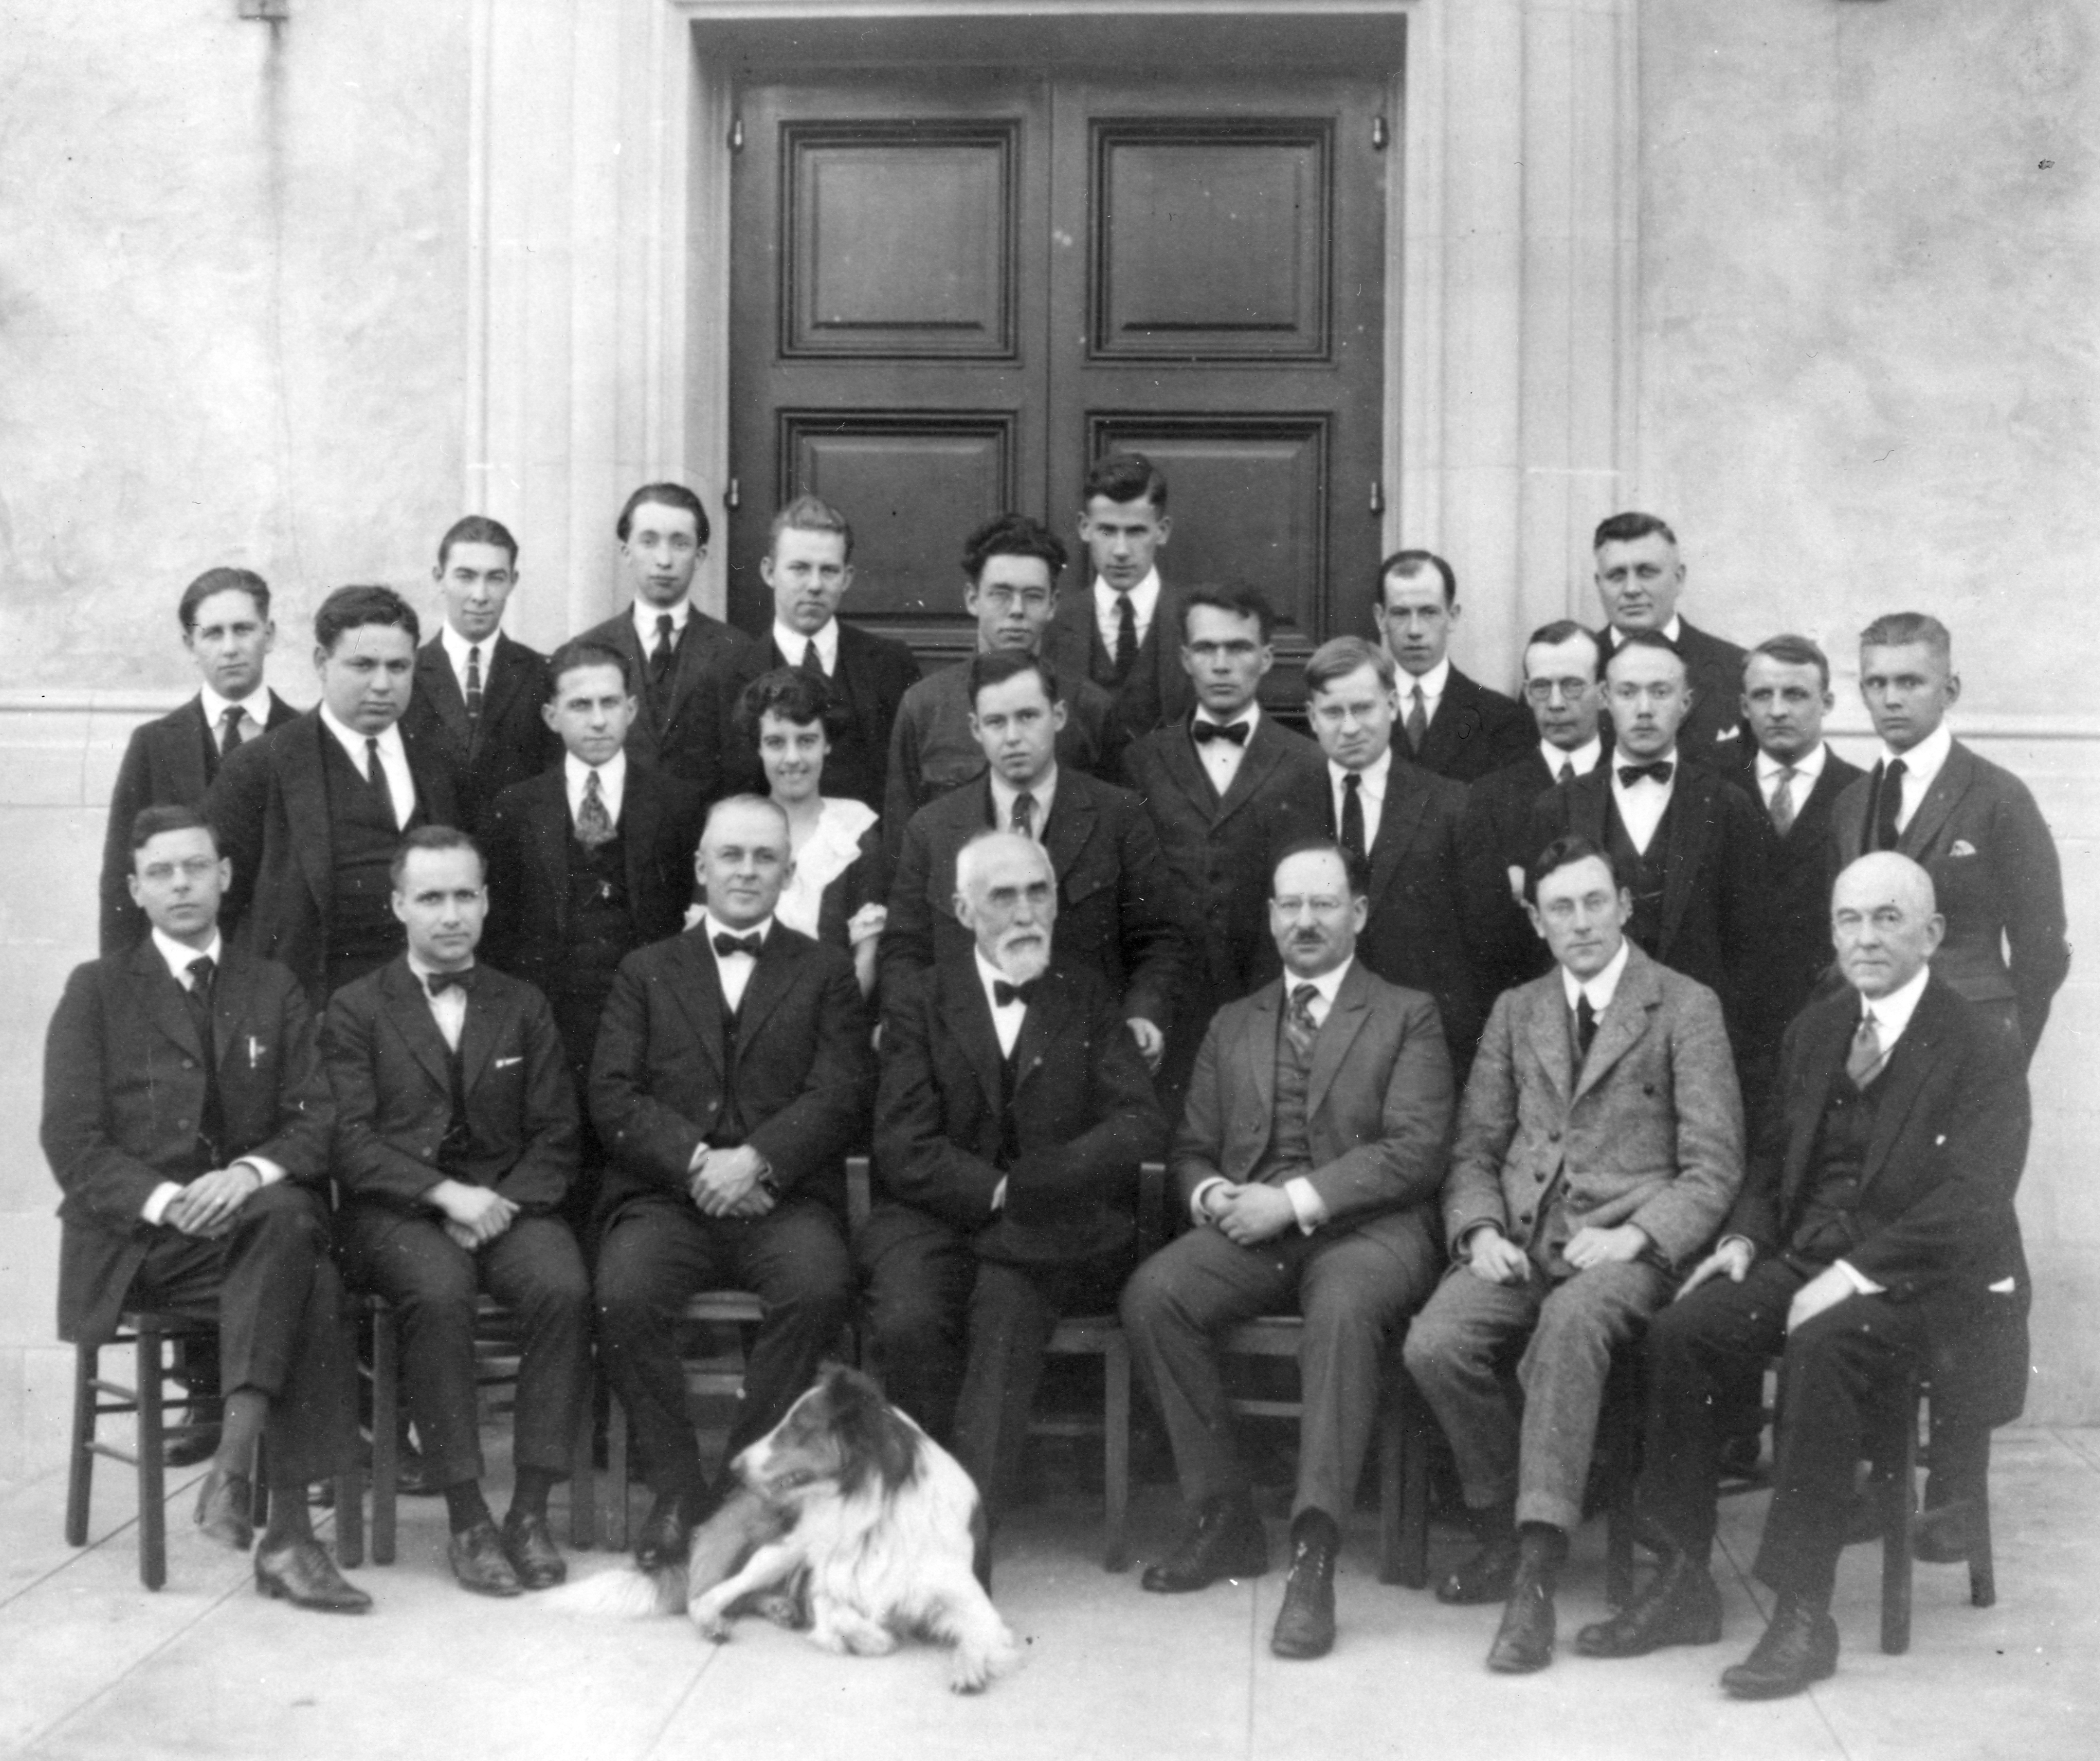 The 1922 Norman Bridge Laboratory of Physics faculty of Caltech